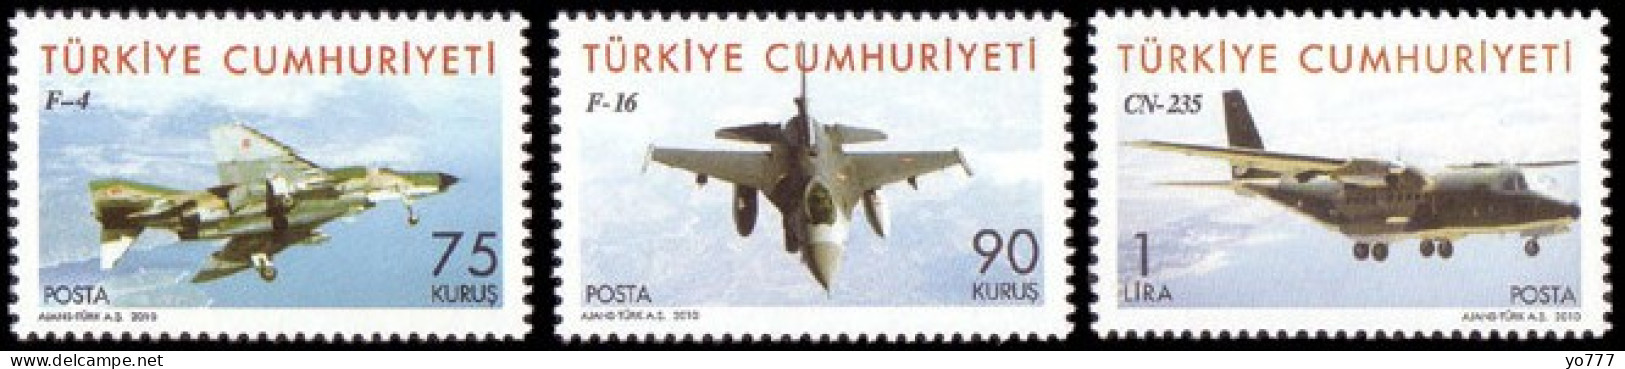 (3807-09) TURKEY AIRPLANES STAMPS SET MNH** - Unused Stamps